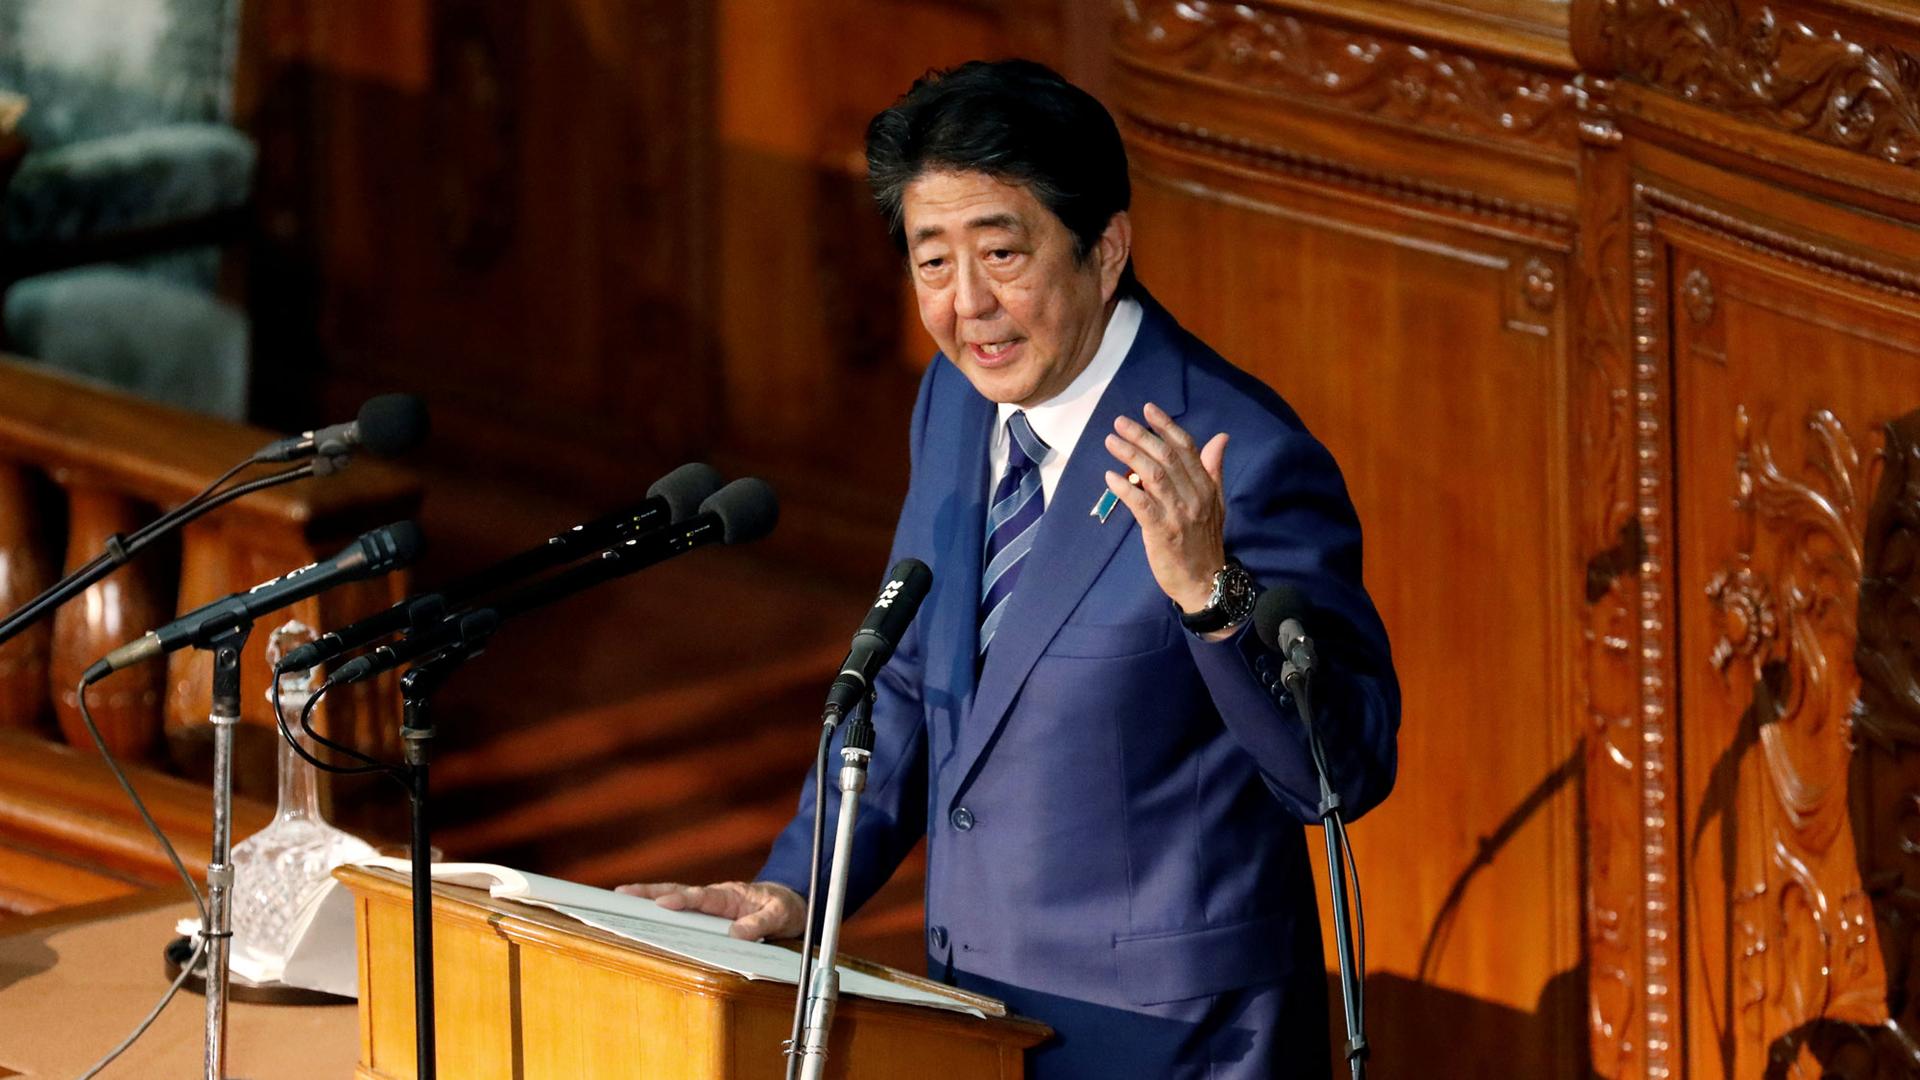 Japan's Prime Minister Shinzo Abe is shown standing at a podium with his left hand raised delivering a policy speech.